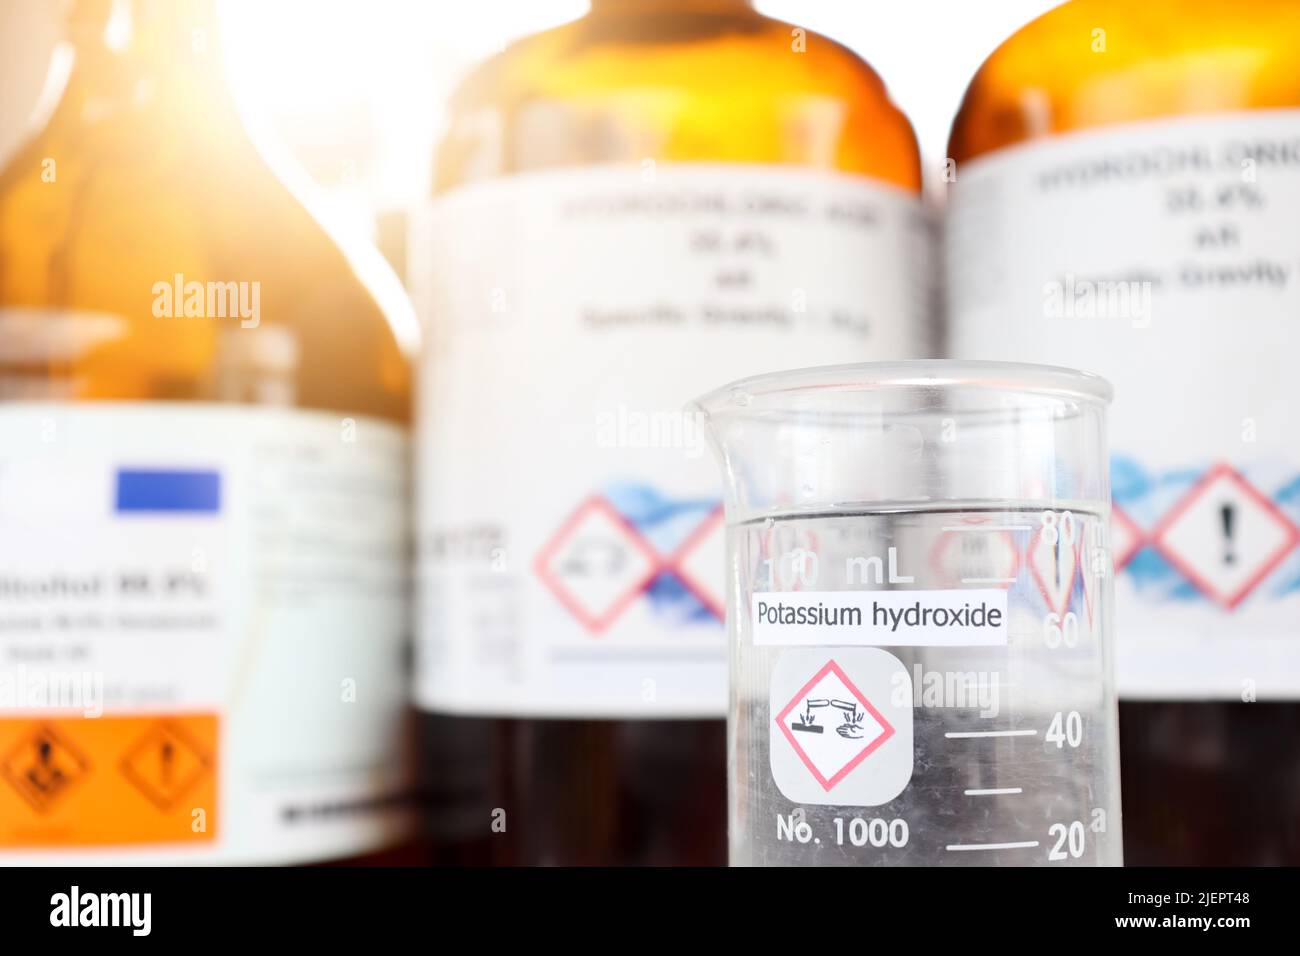 Potassium hydroxide liquid in glass, chemical in the laboratory and industry Stock Photo